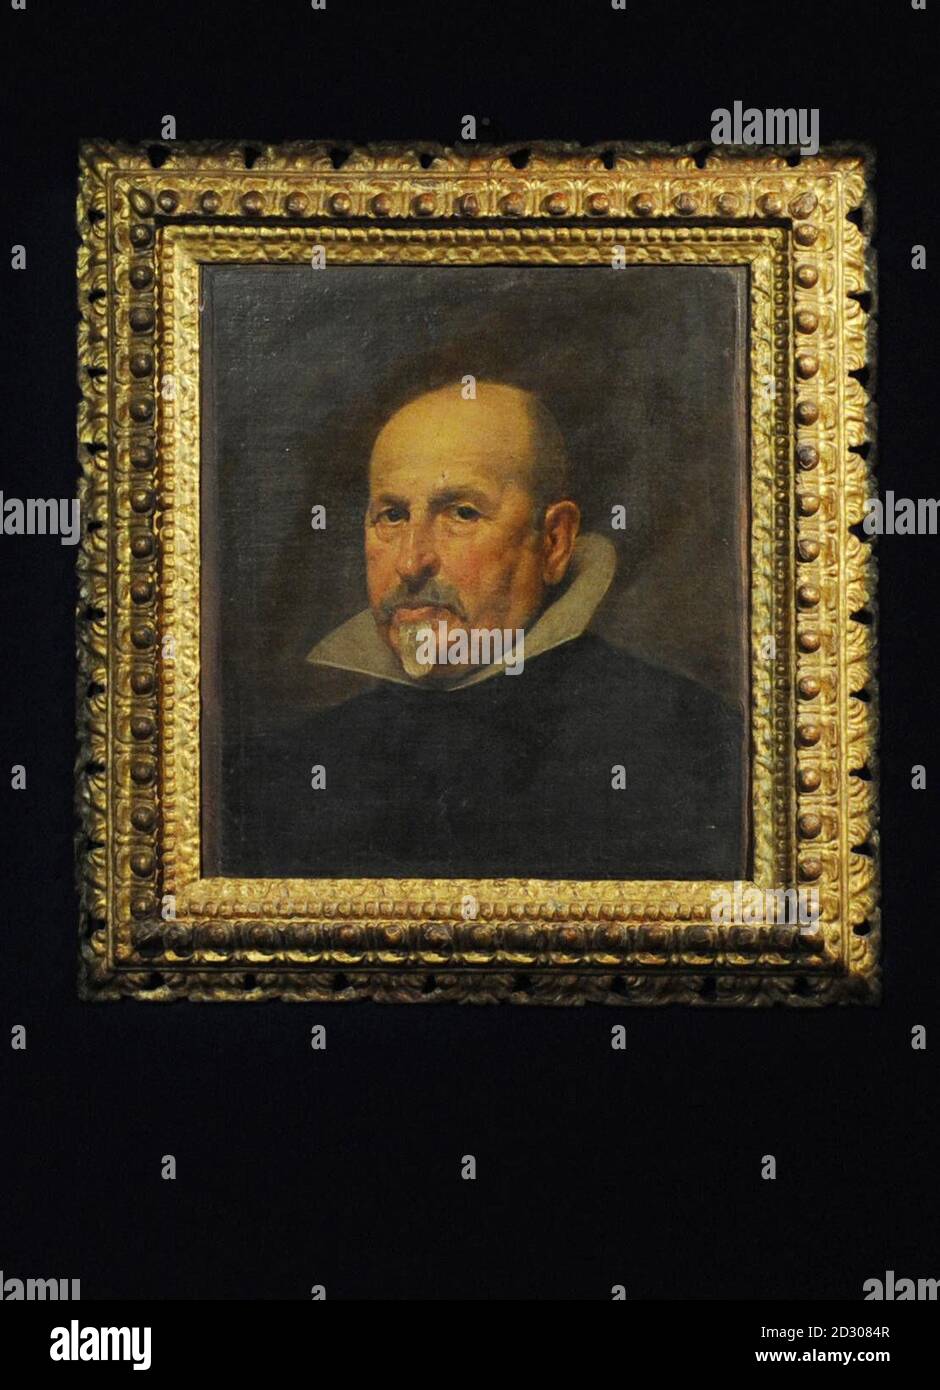 A previously unknown portrait  by Spanish artist Diego Rodriguez de Silva y Velazquez on show at  Bonhams in London ahead of the auction house's Old Master Paintings sale in December with an estimate of 2 million.   Stock Photo